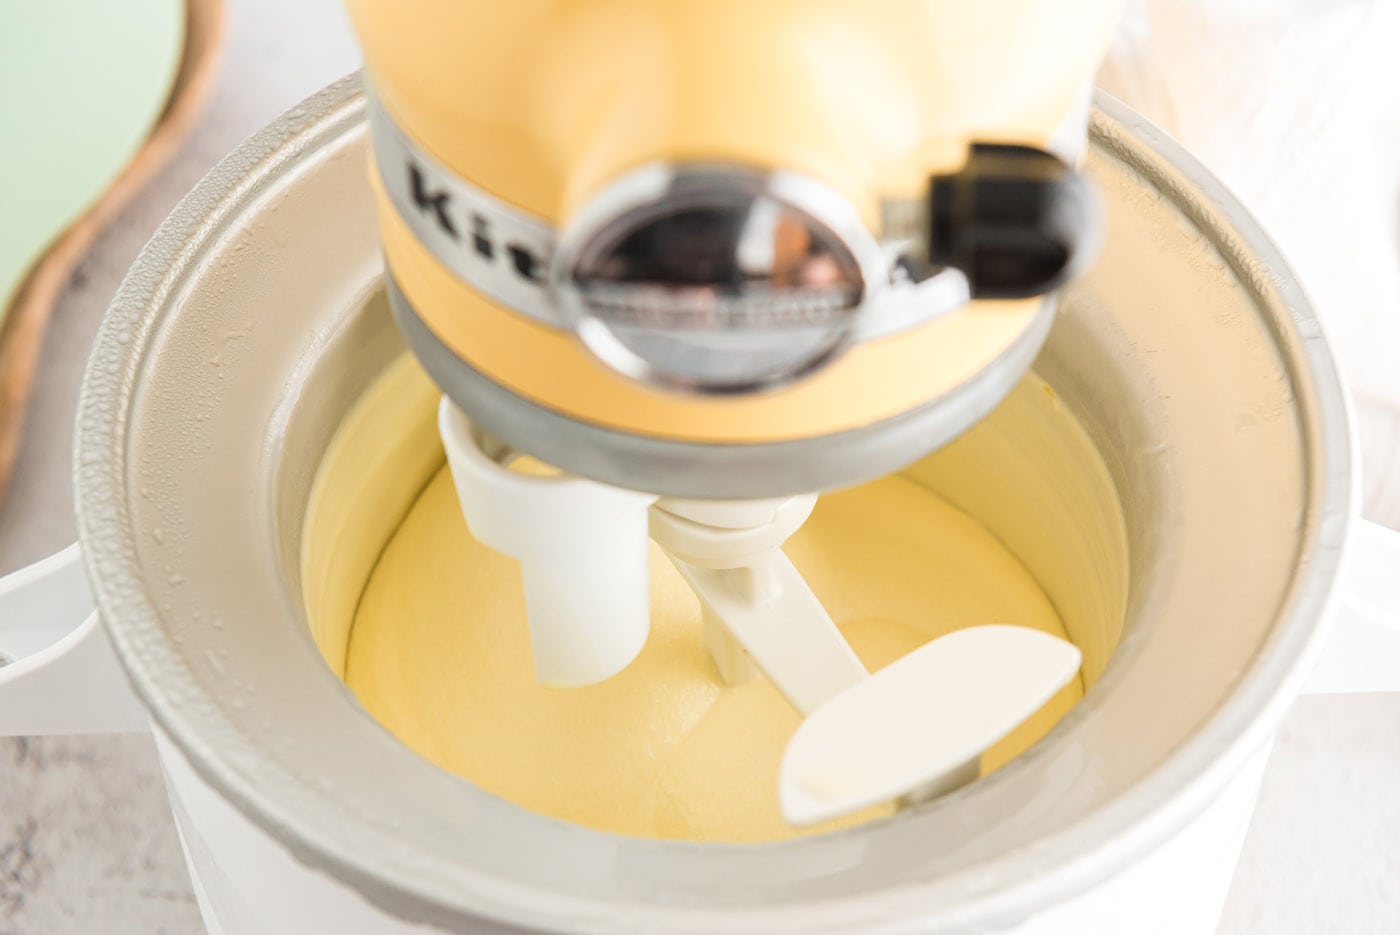 Ice cream being mixed in an ice cream maker